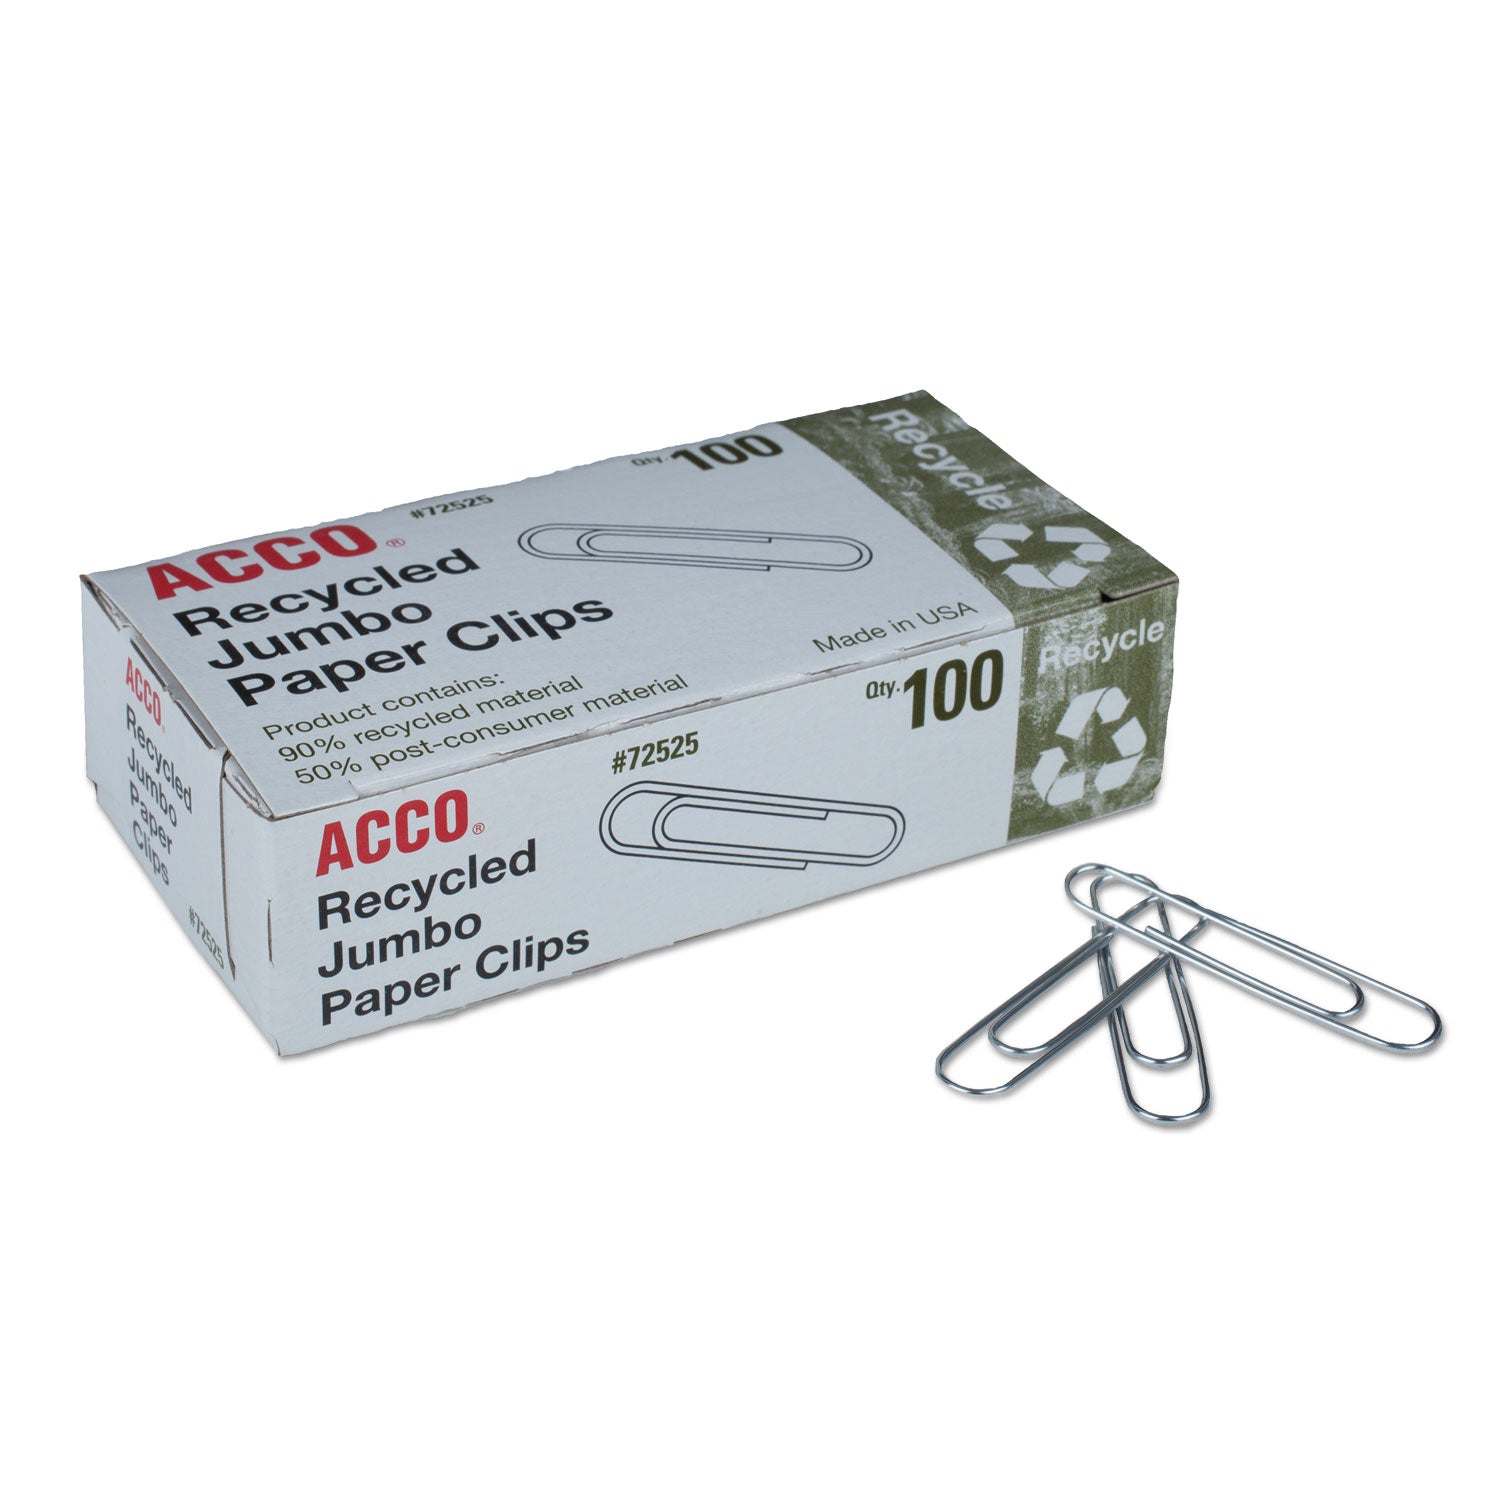 Recycled Paper Clips, Jumbo, Smooth, Silver, 100 Clips/Box, 10 Boxes/Pack - 